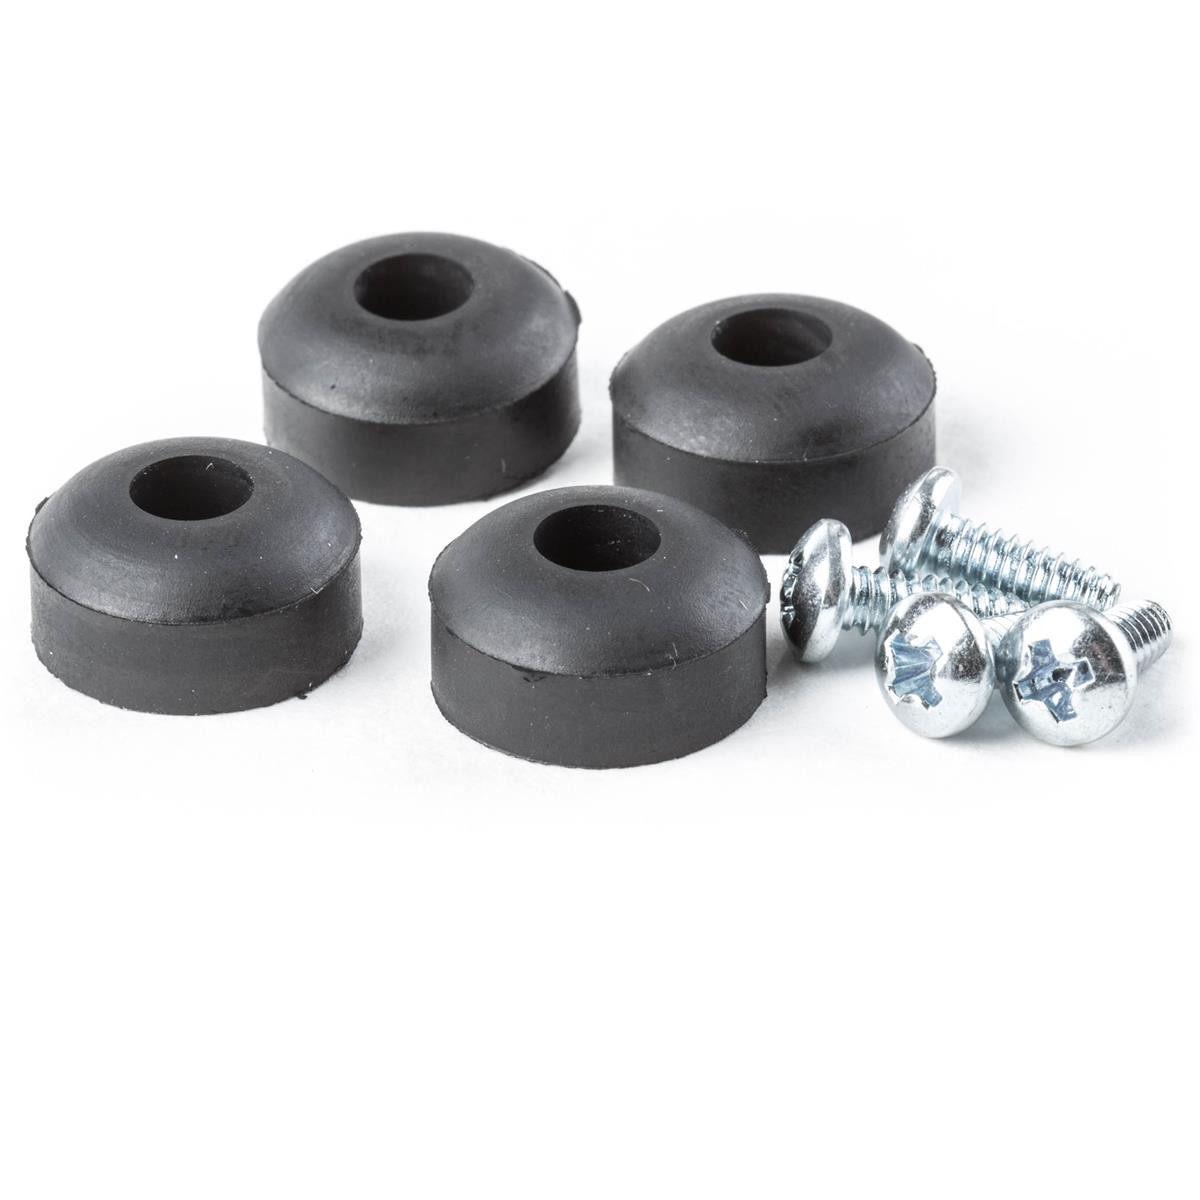 Image of Dunlop Wah Rubber Feet Set with Screws for Cry Baby Wah Pedals